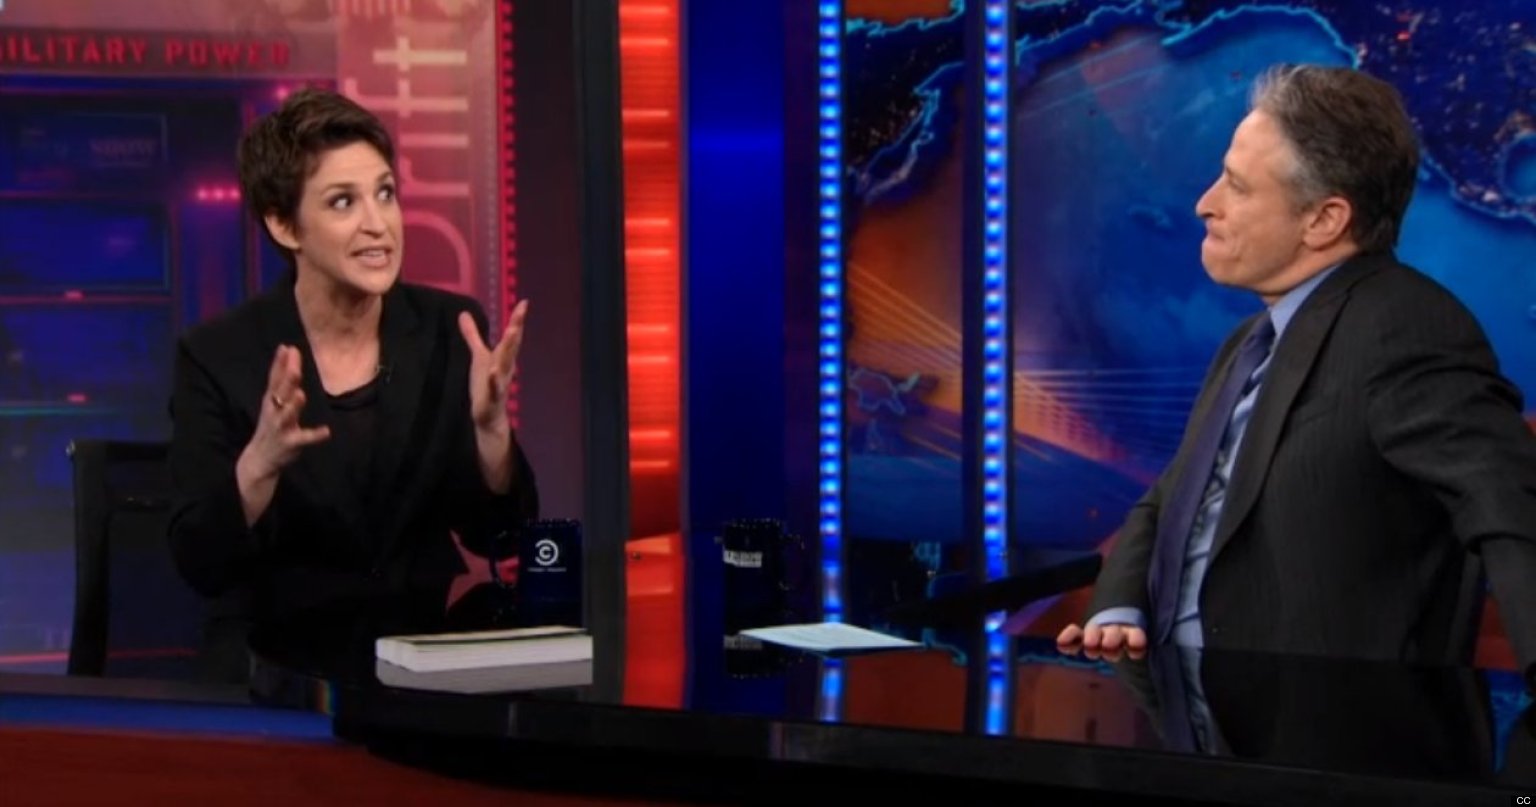 Rachel Maddow on the Daily Show last night.